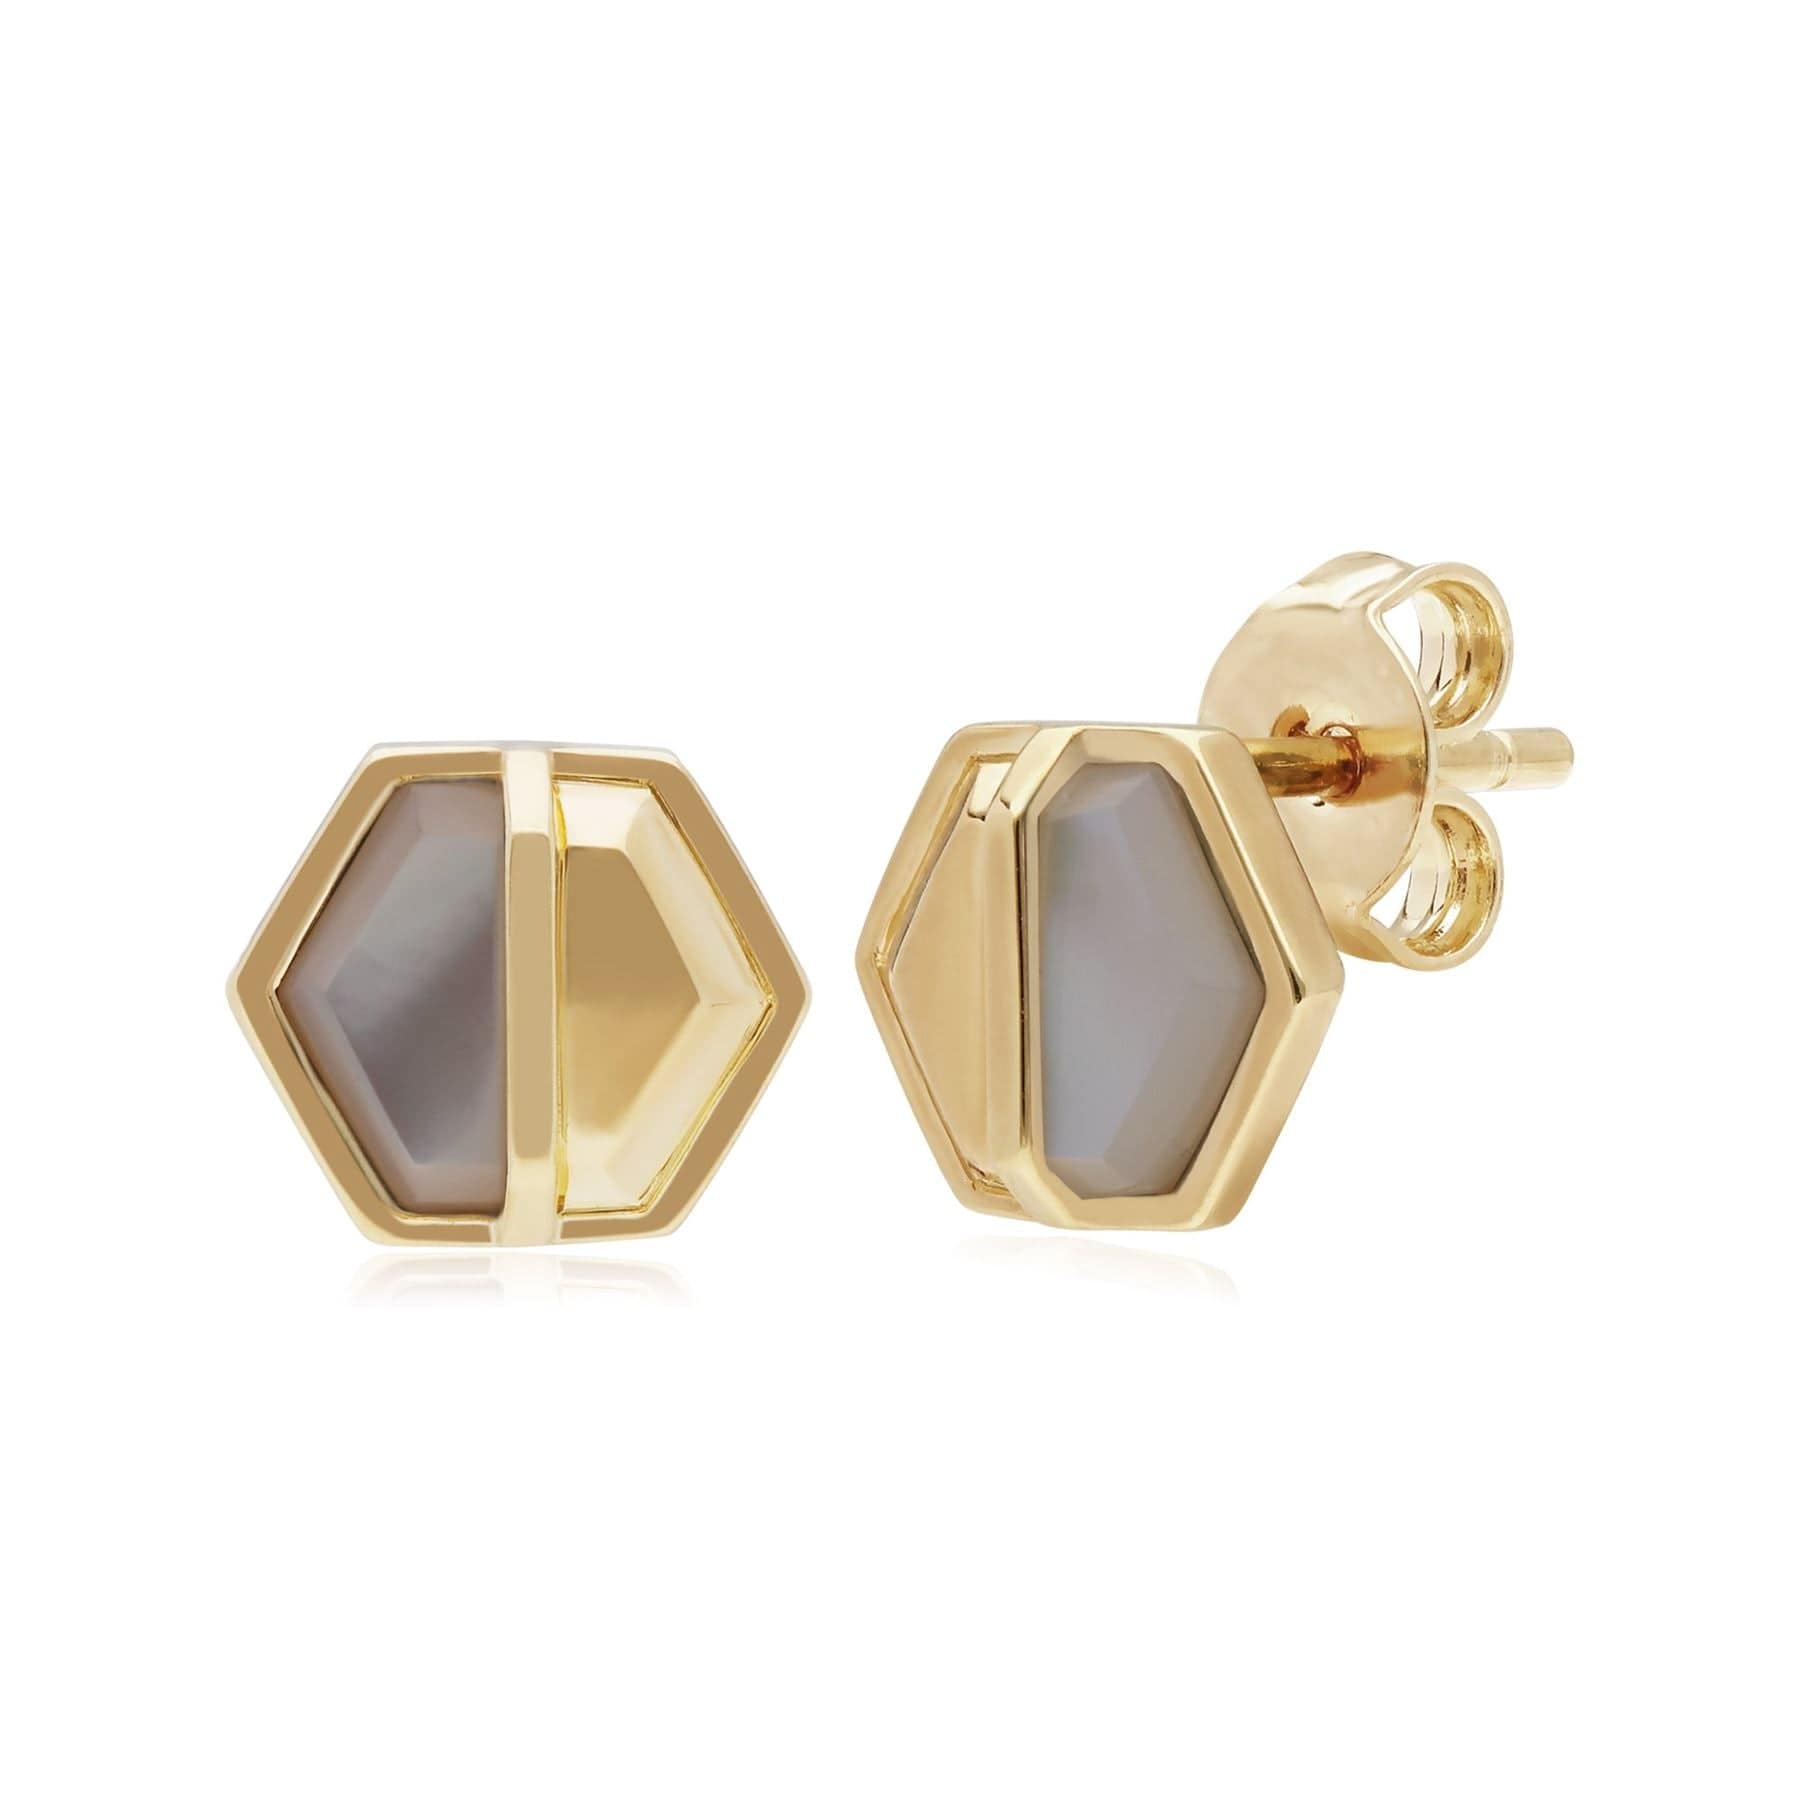 Micro Statement Mother of Pearl Hexagon Stud Earrings in Gold Plated 925 Sterling Silver